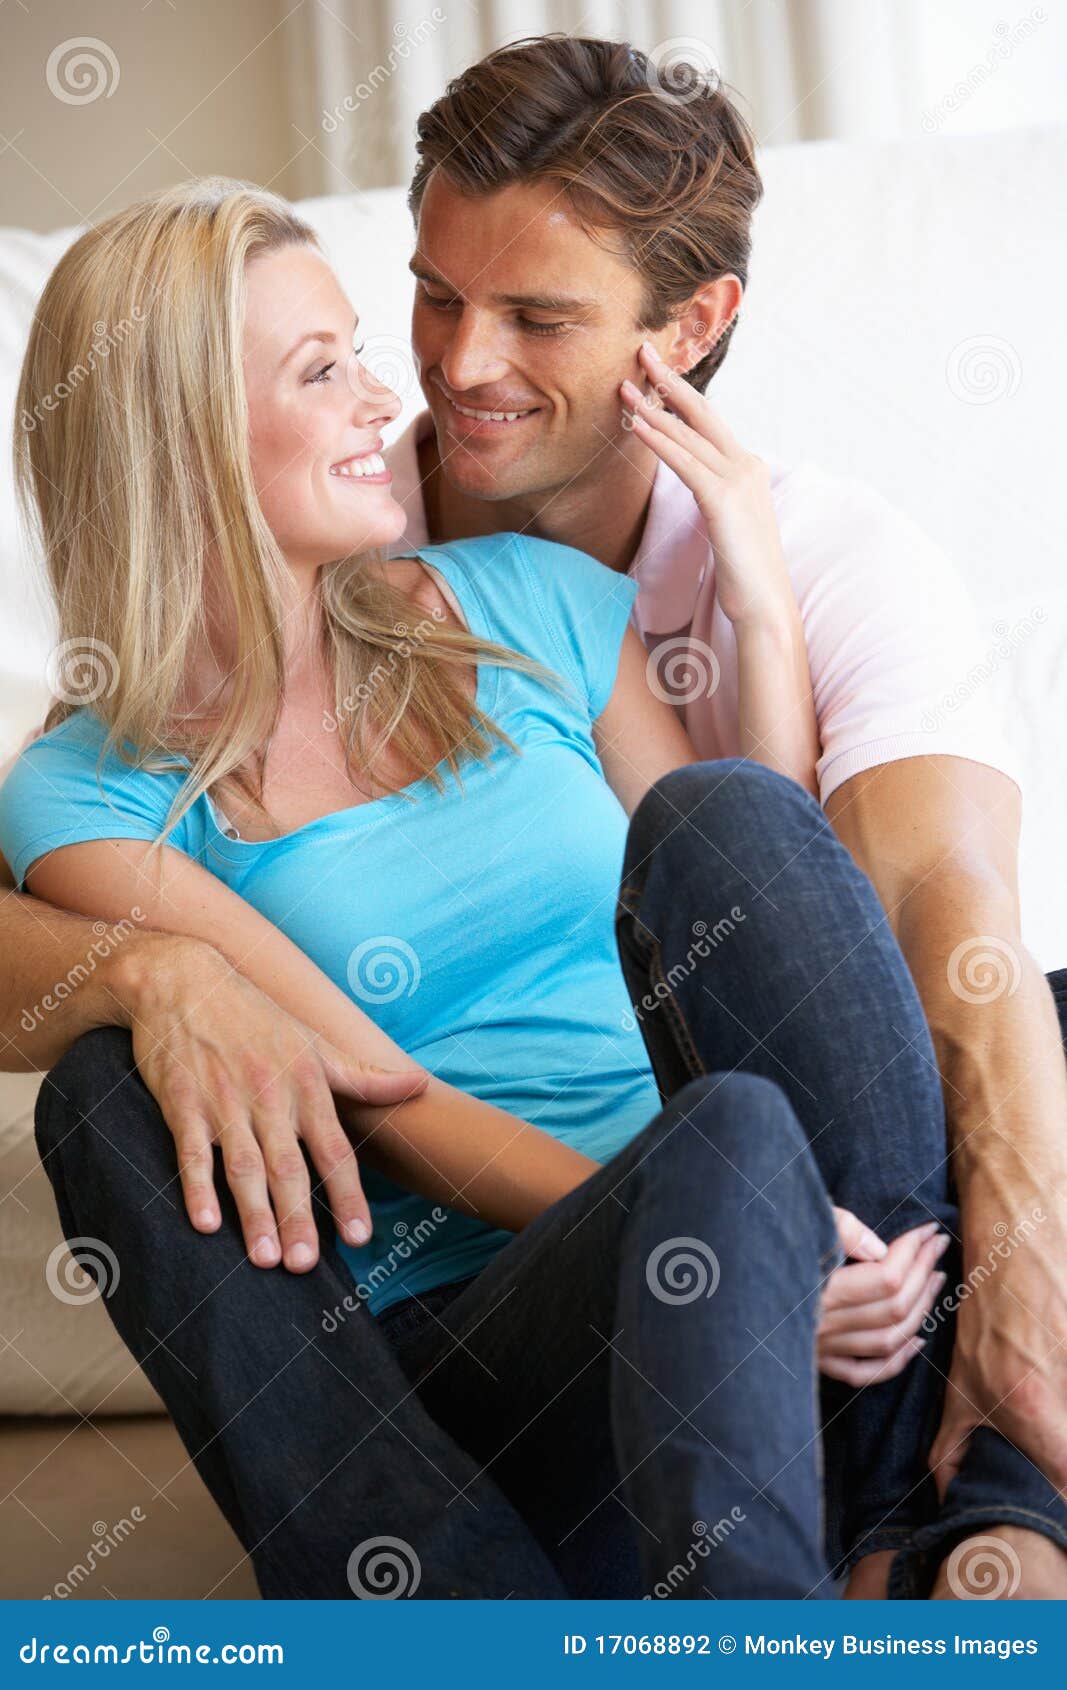 young couple posing indoors